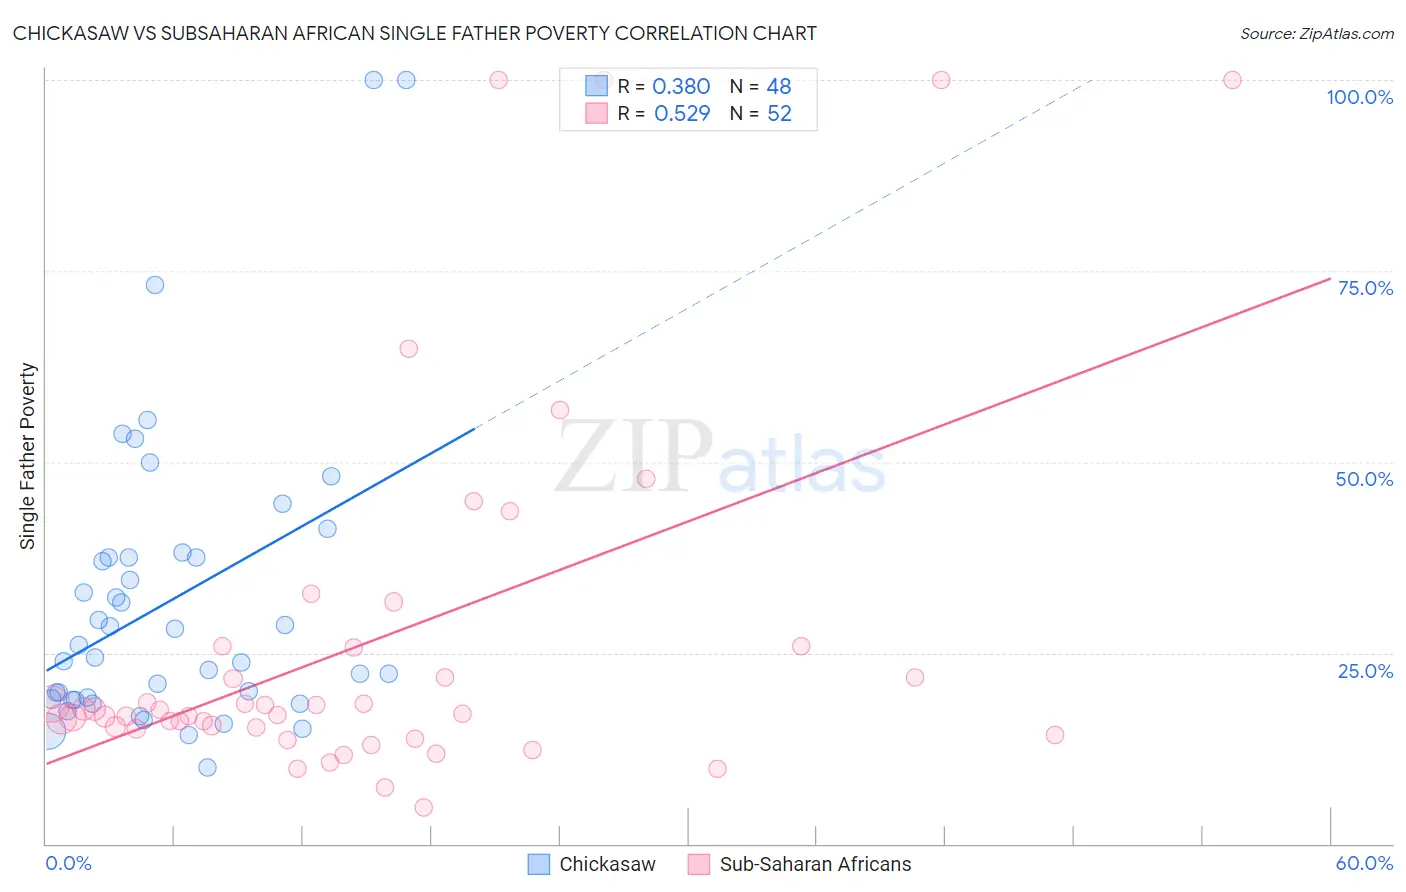 Chickasaw vs Subsaharan African Single Father Poverty